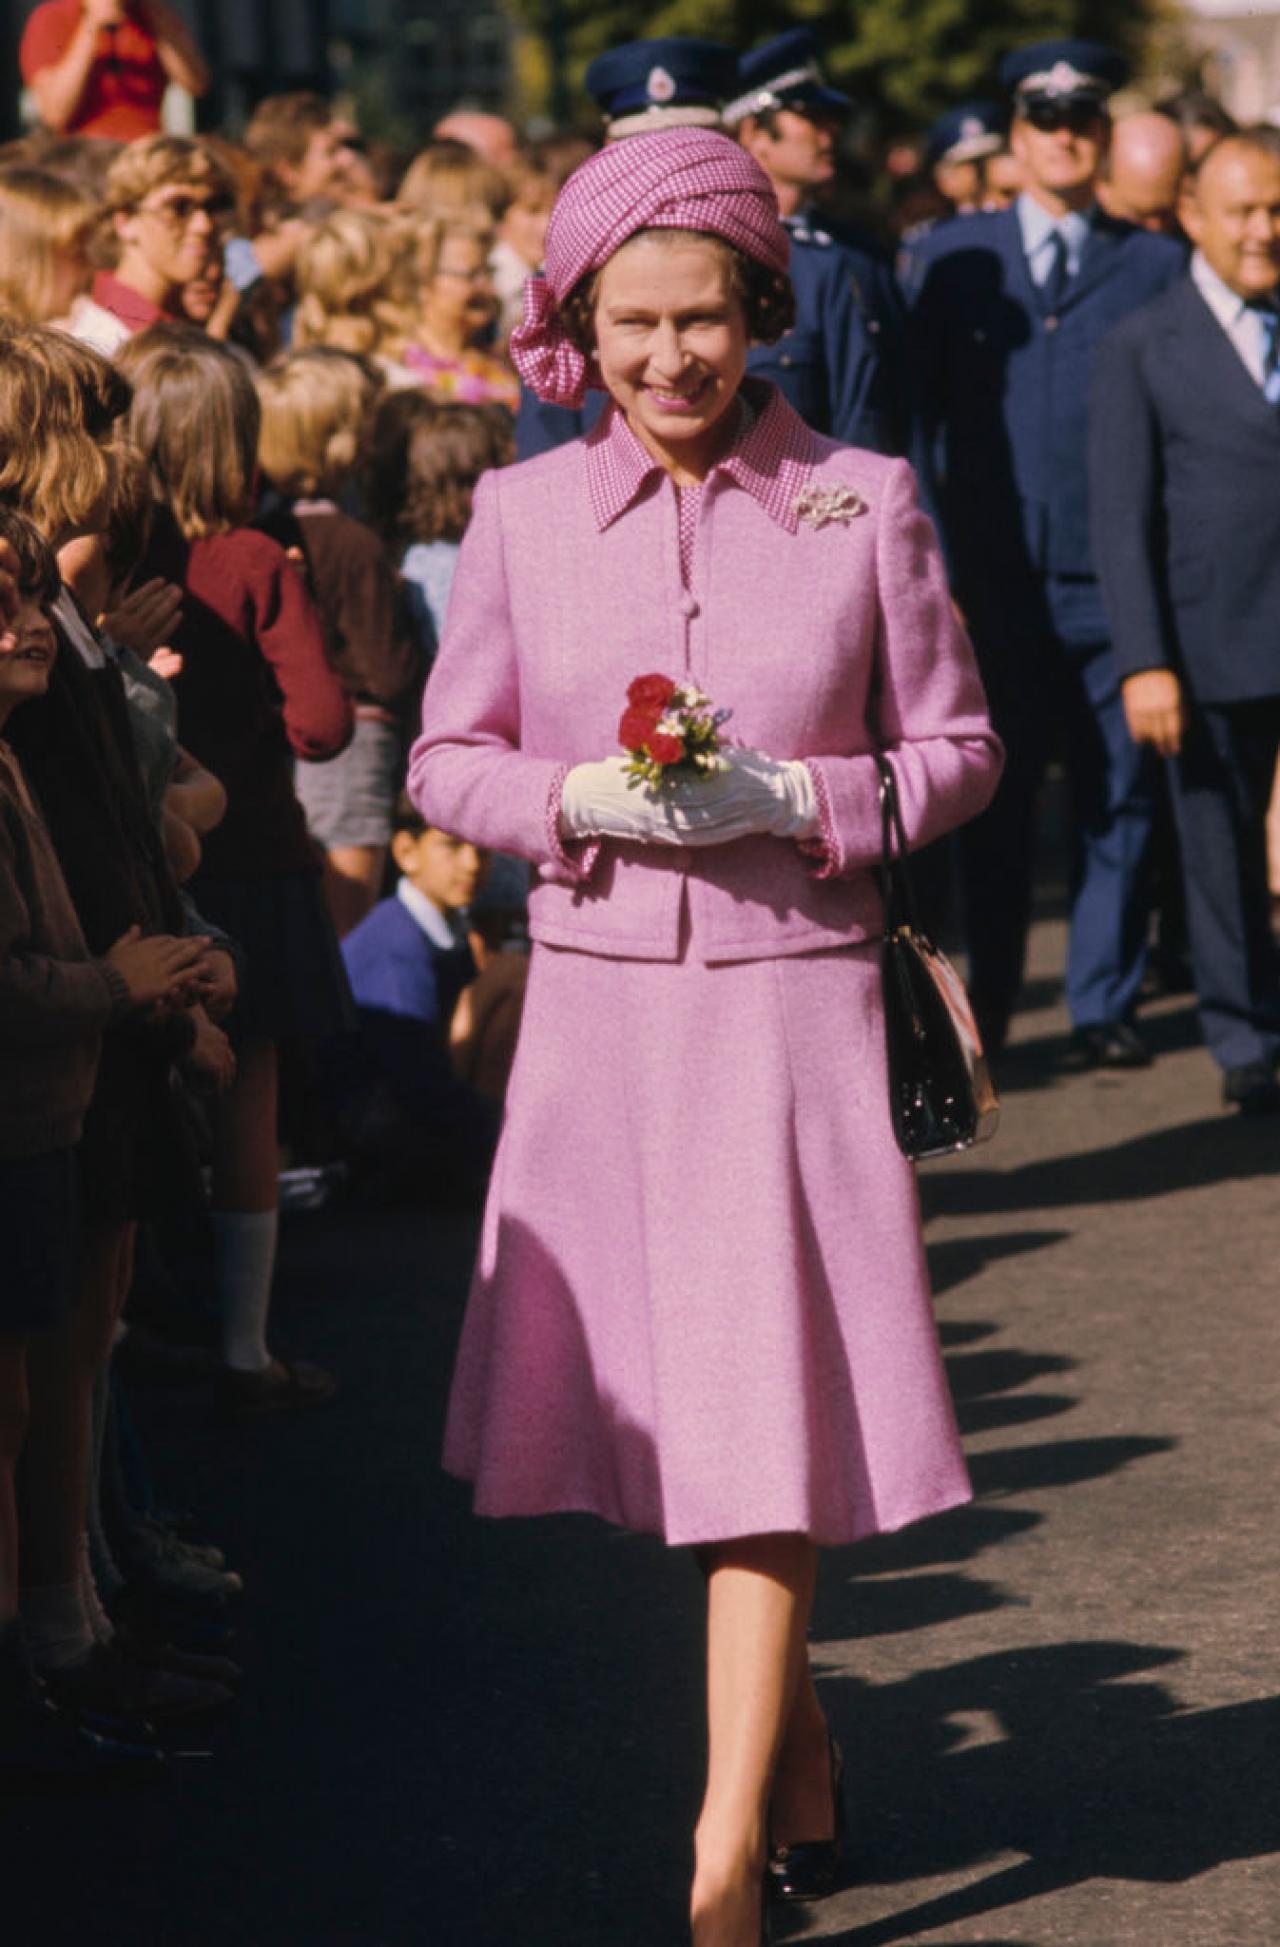 British Royal Queen Elizabeth ll, wearing a lilac suit with a checked collar and matching turban-style hat, during a walkabout in Wellington, New Zealand, 27th February 1977. The visit is part of the Queen's Silver Jubilee tour. (Photo by Serge Lemoine/Hulton Archive/Getty Images)